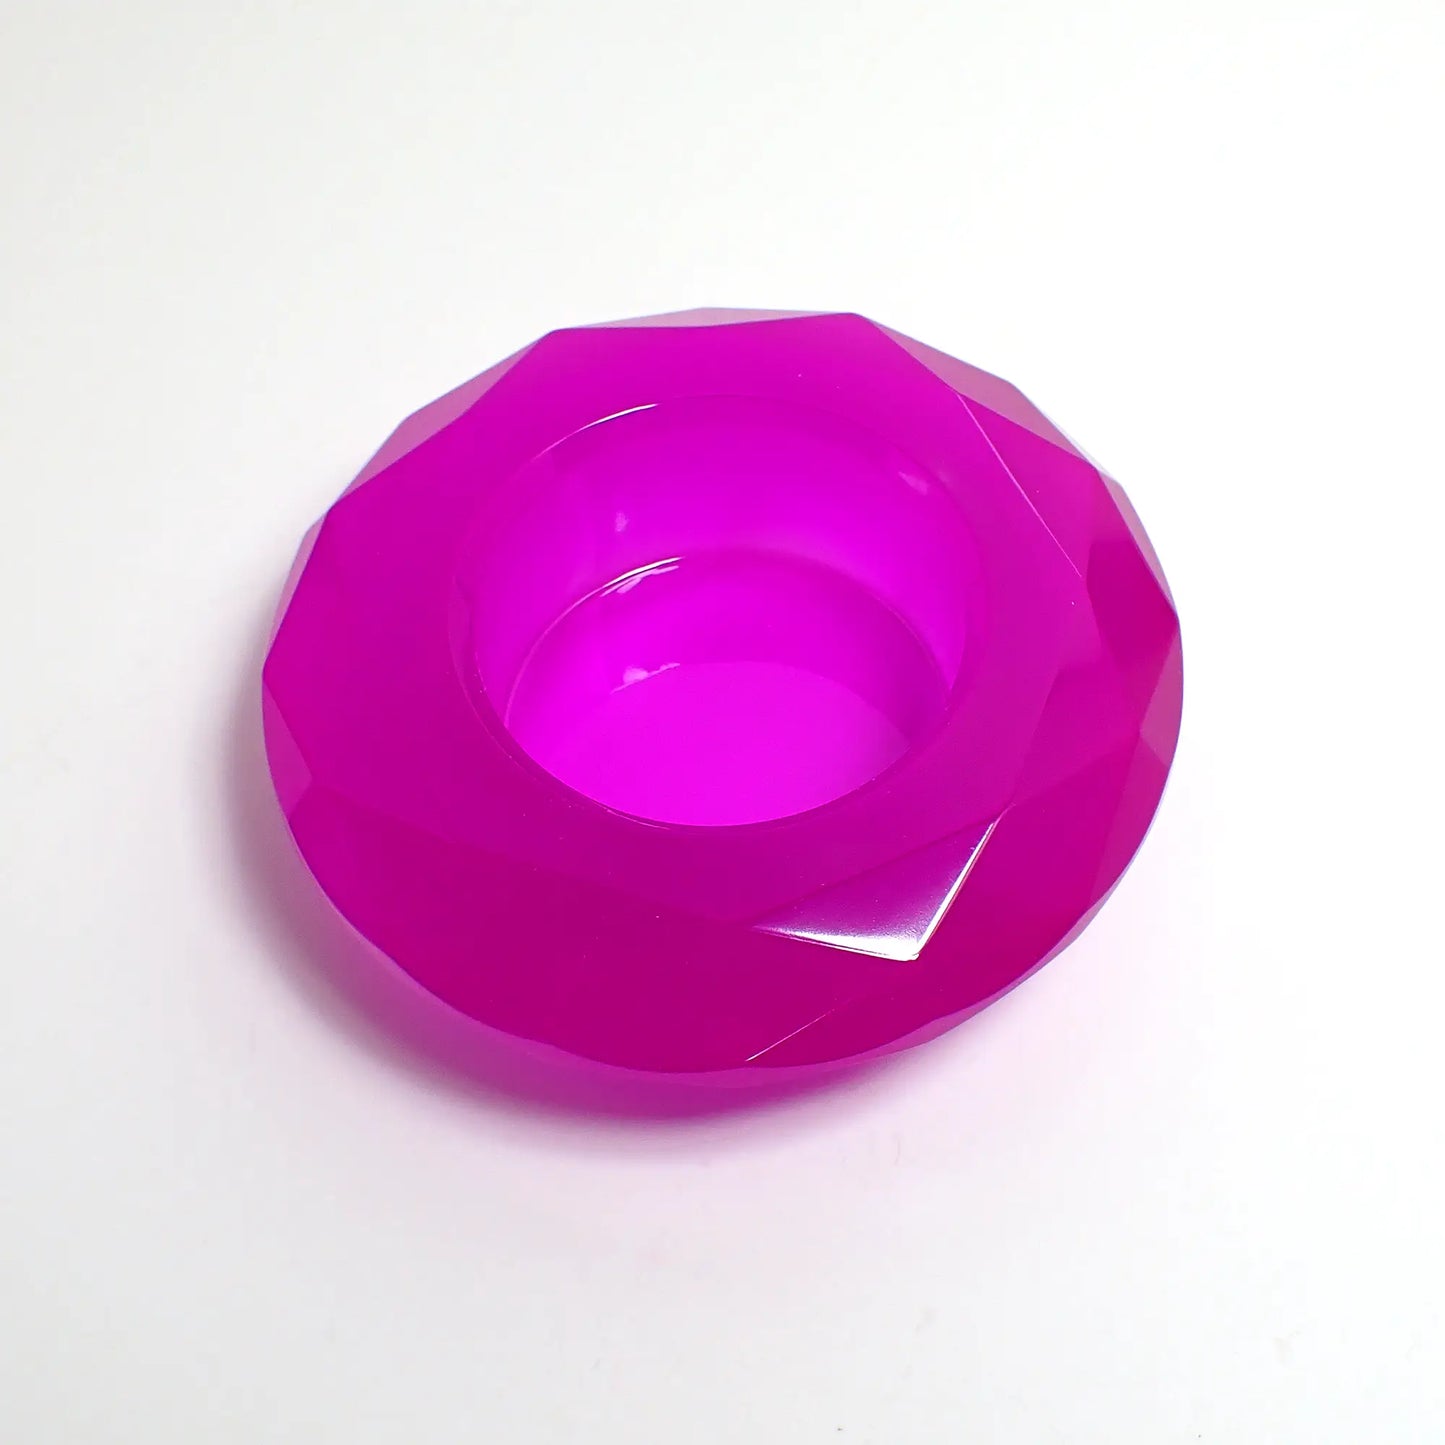 Small Handmade Tapered Faceted Round Neon Purple Resin Decorative Pot